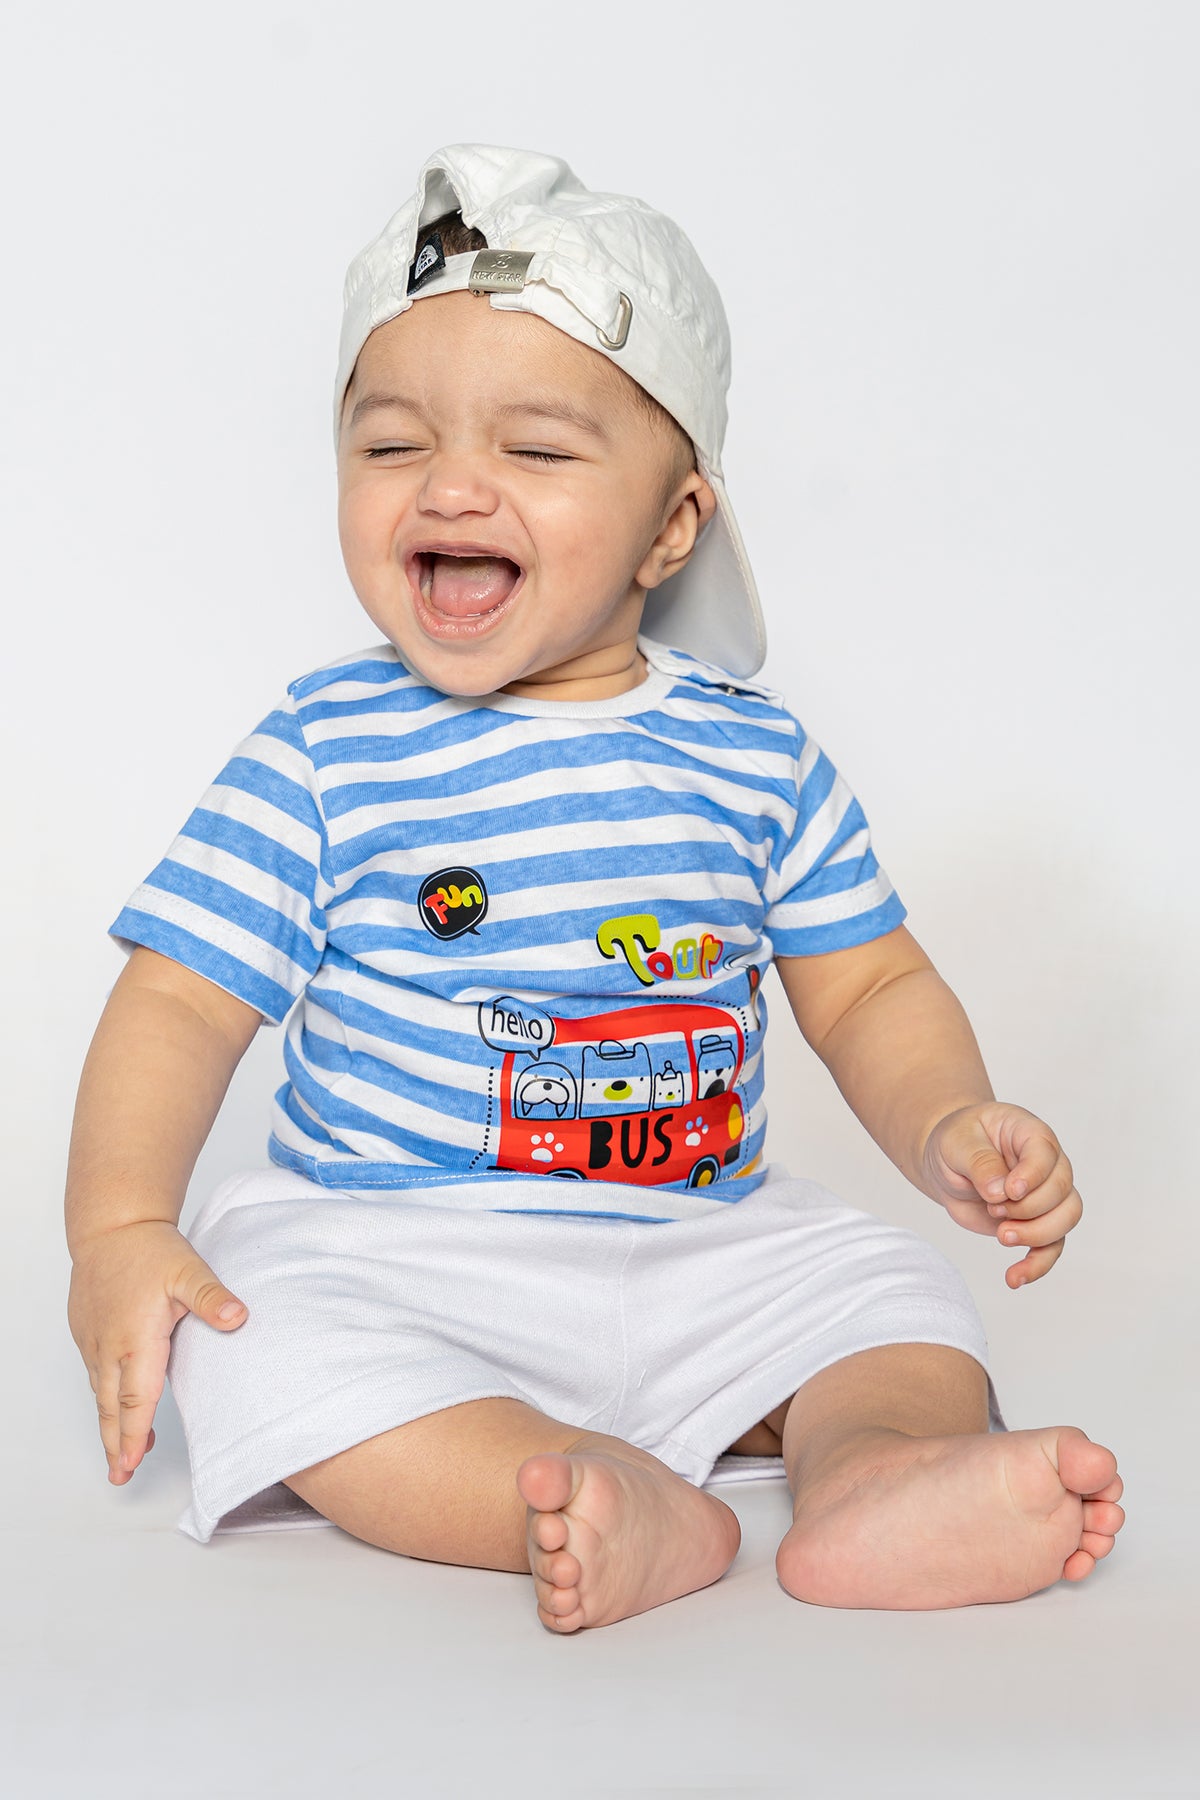 BABY T-SHIRT BLUE FRONT "BUS" PRINTING